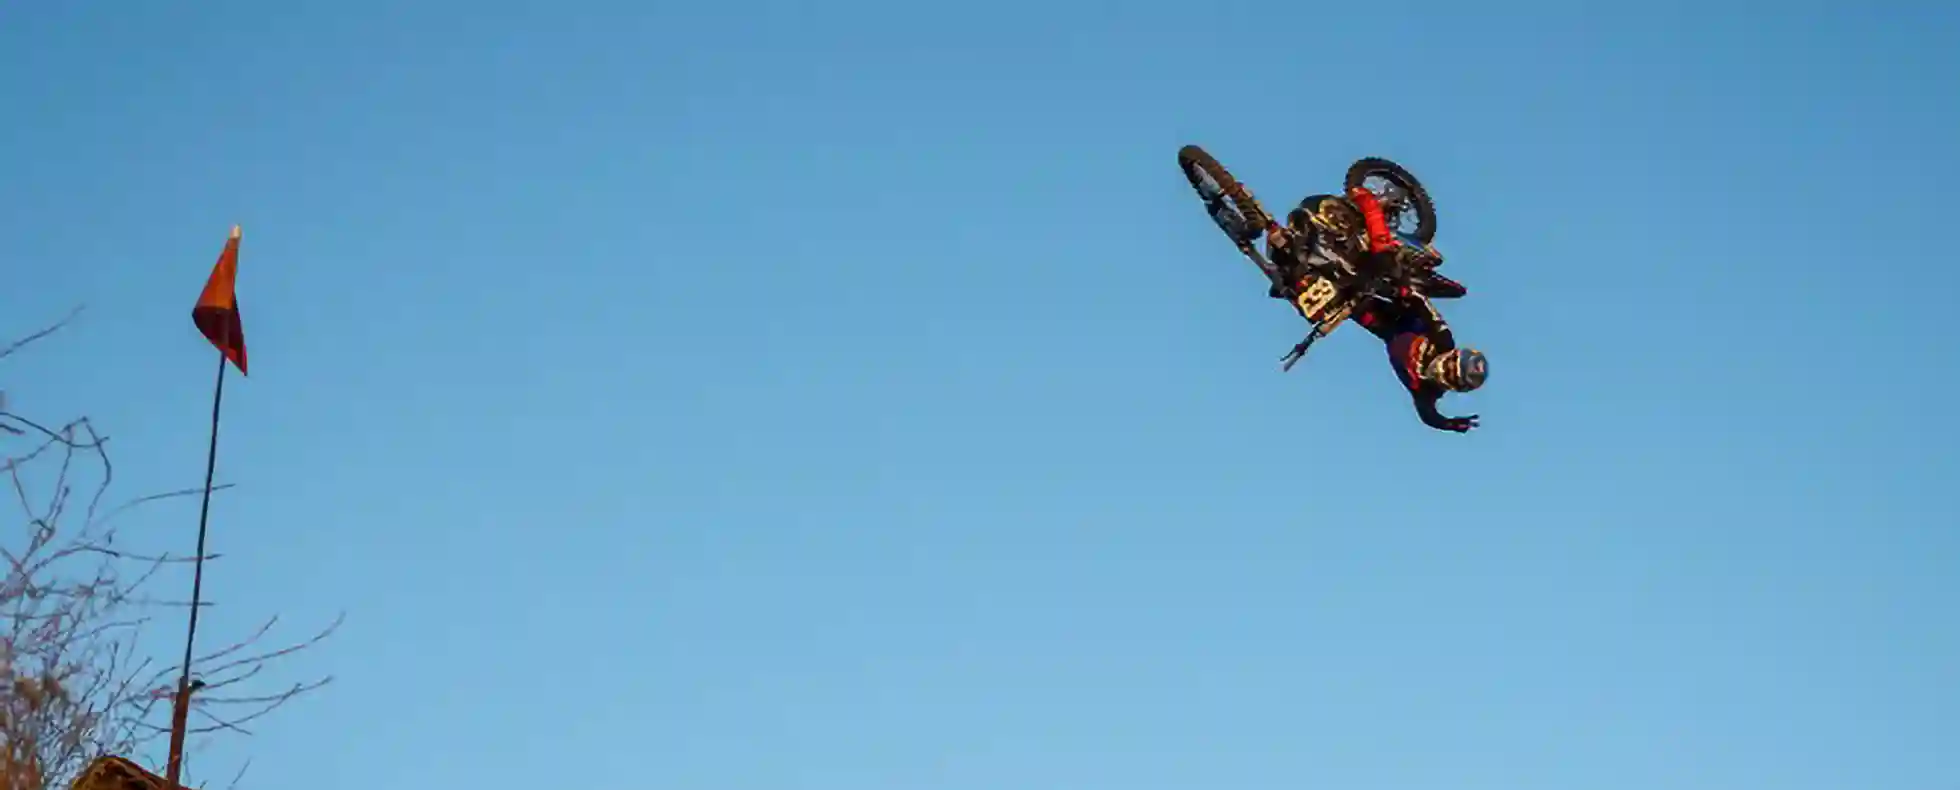 Big Machines, Big Ambitions and Big Air: Pro Motocross Freestyle Rider Builds Precise Quarter Pipe